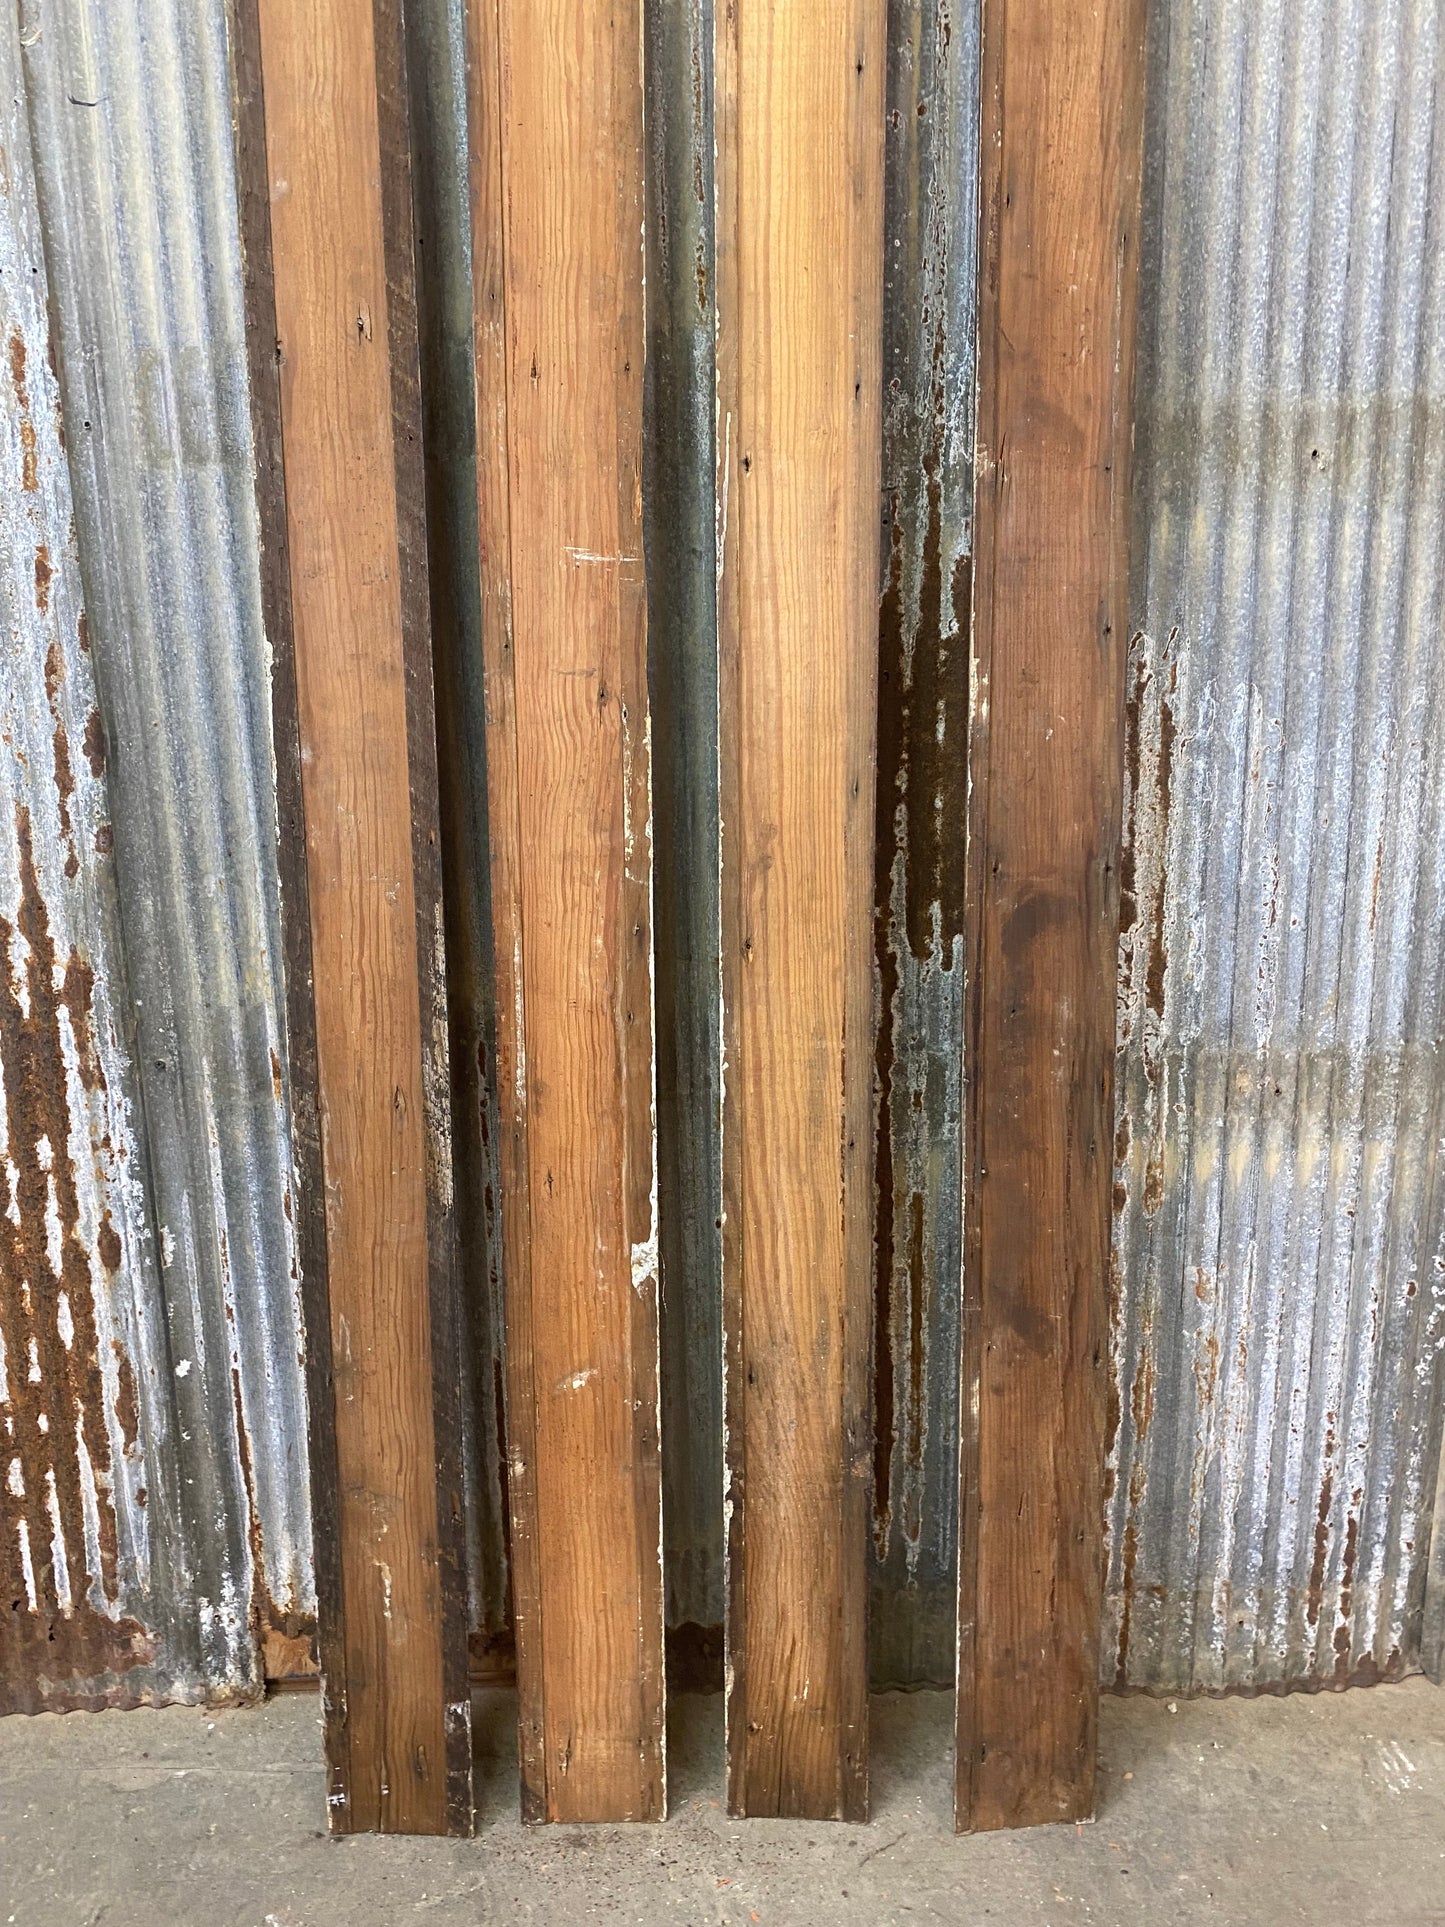 4 Reclaimed Wainscoting Bead Board Pieces, Architectural Salvage Vintage A37,